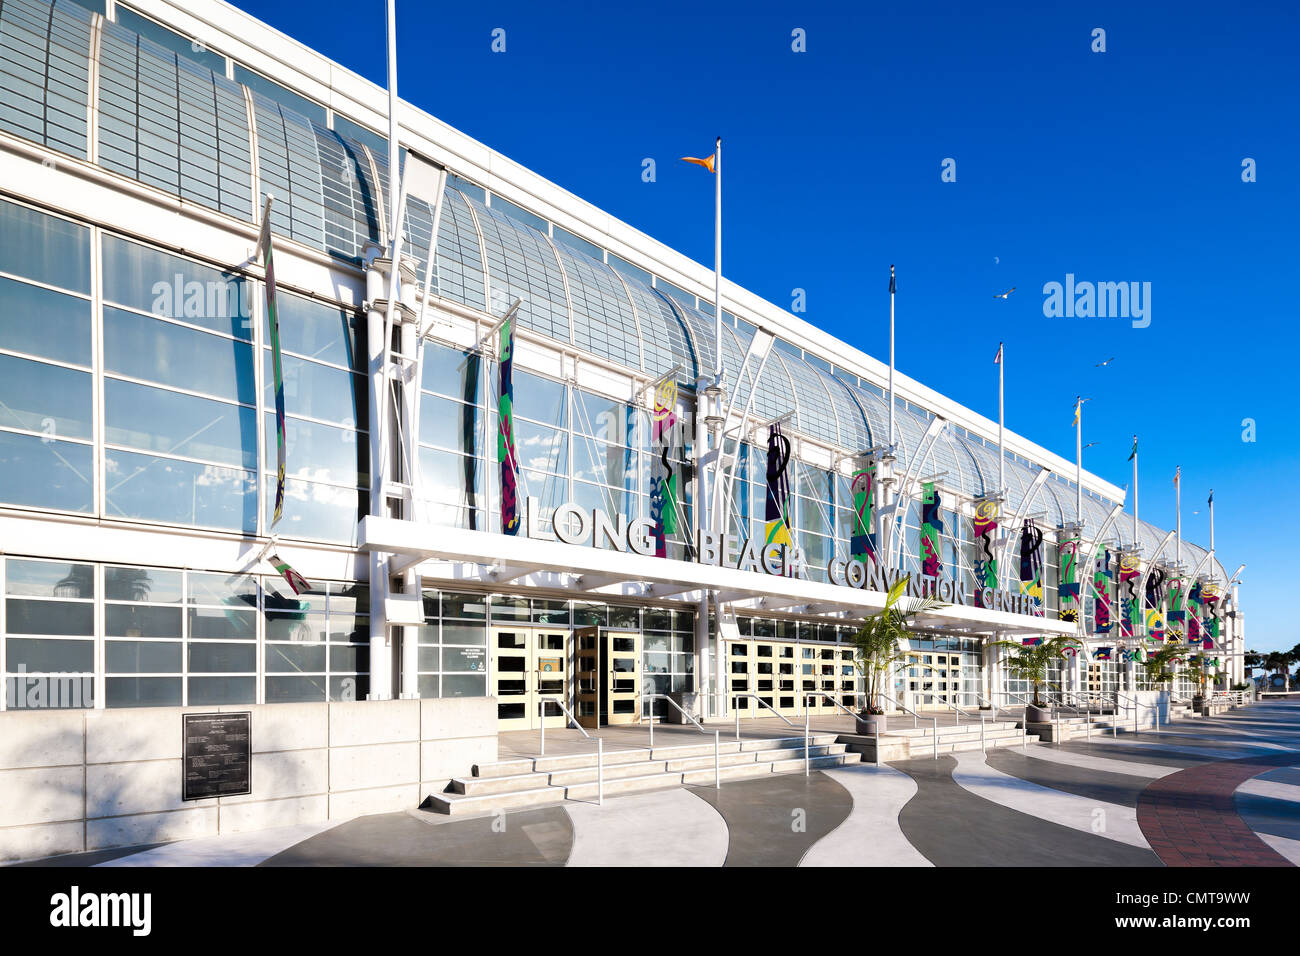 Long Beach Convention Center. Long Beach Convention and Entertainment Center, Haupteingang, Exterieur, tagsüber sonnig. Stockfoto